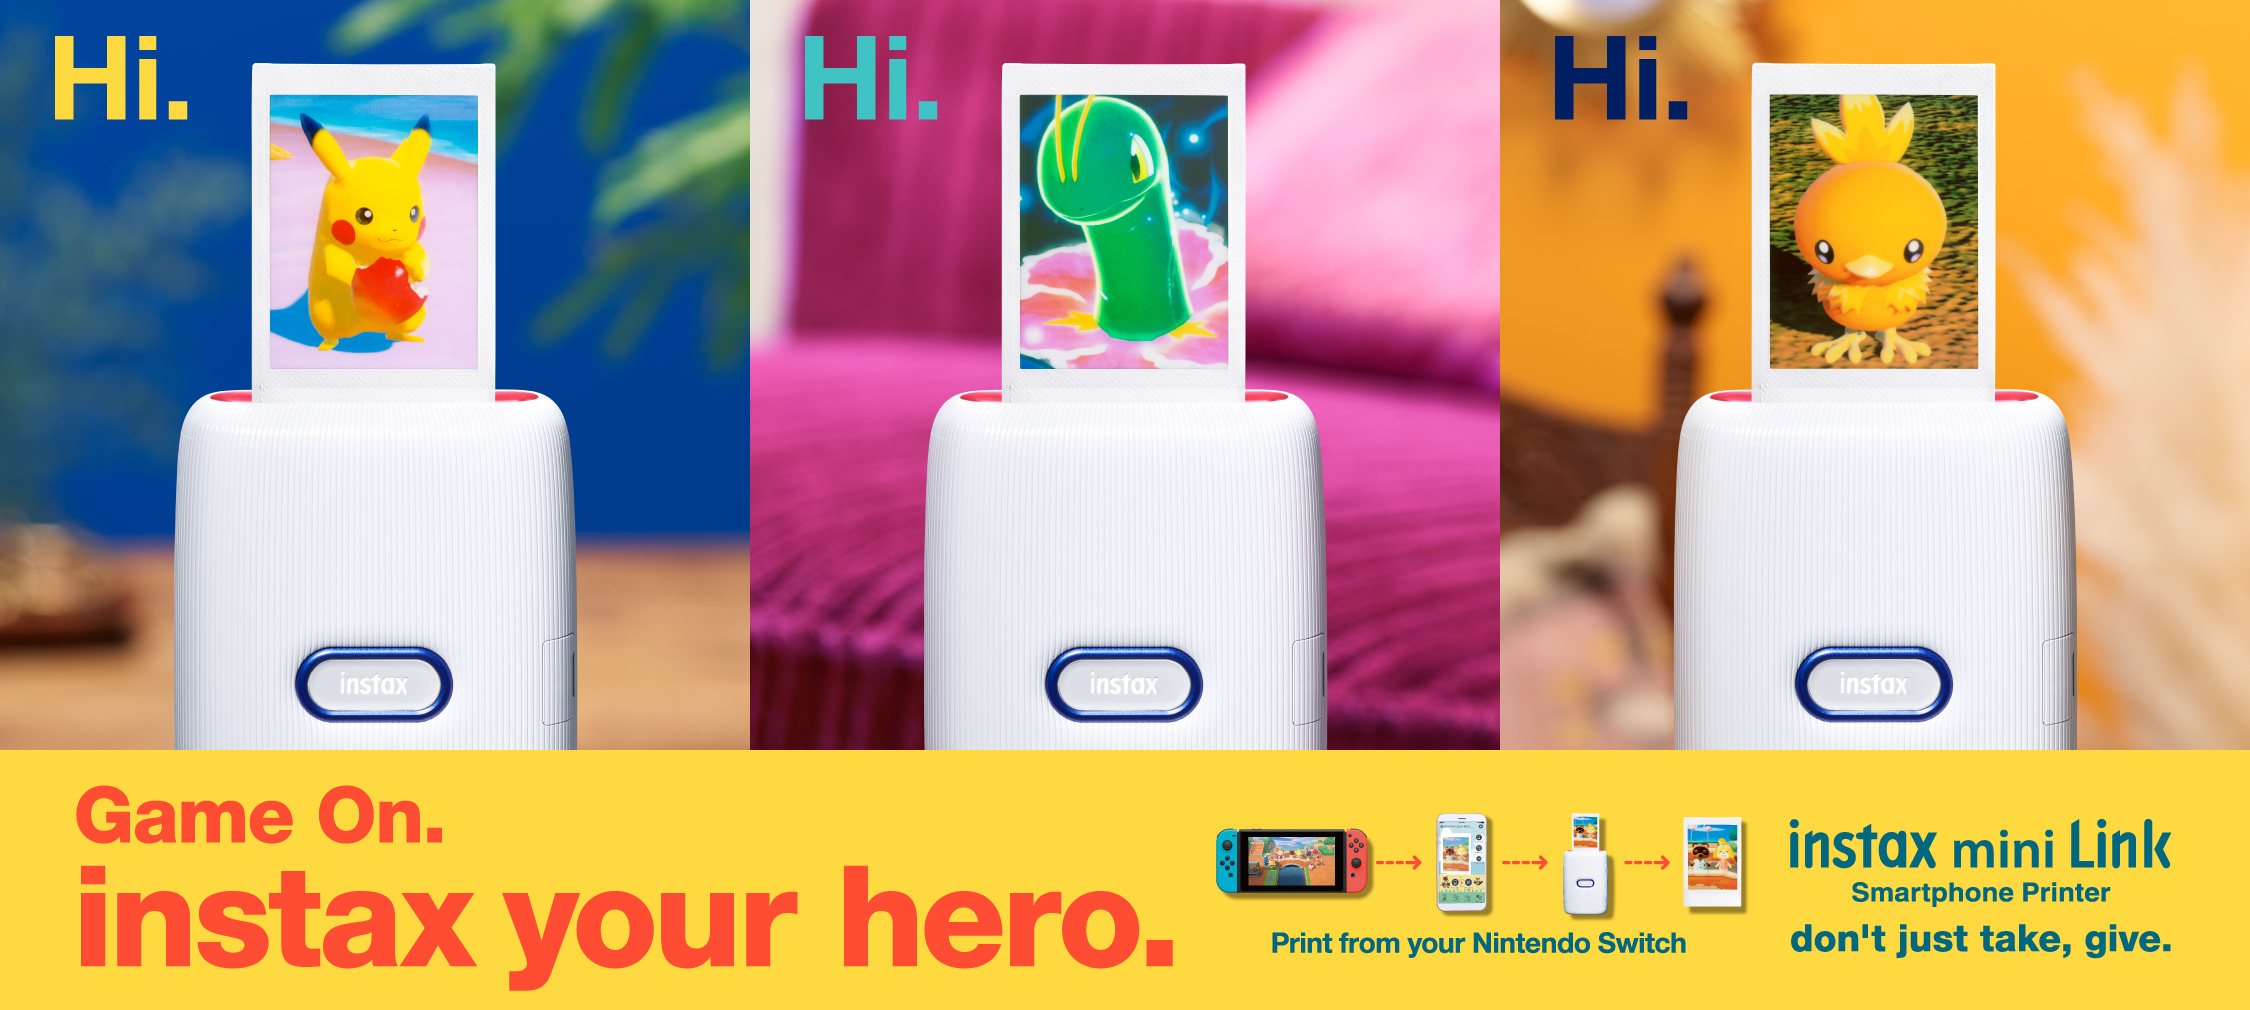 Game on. instax your hero.